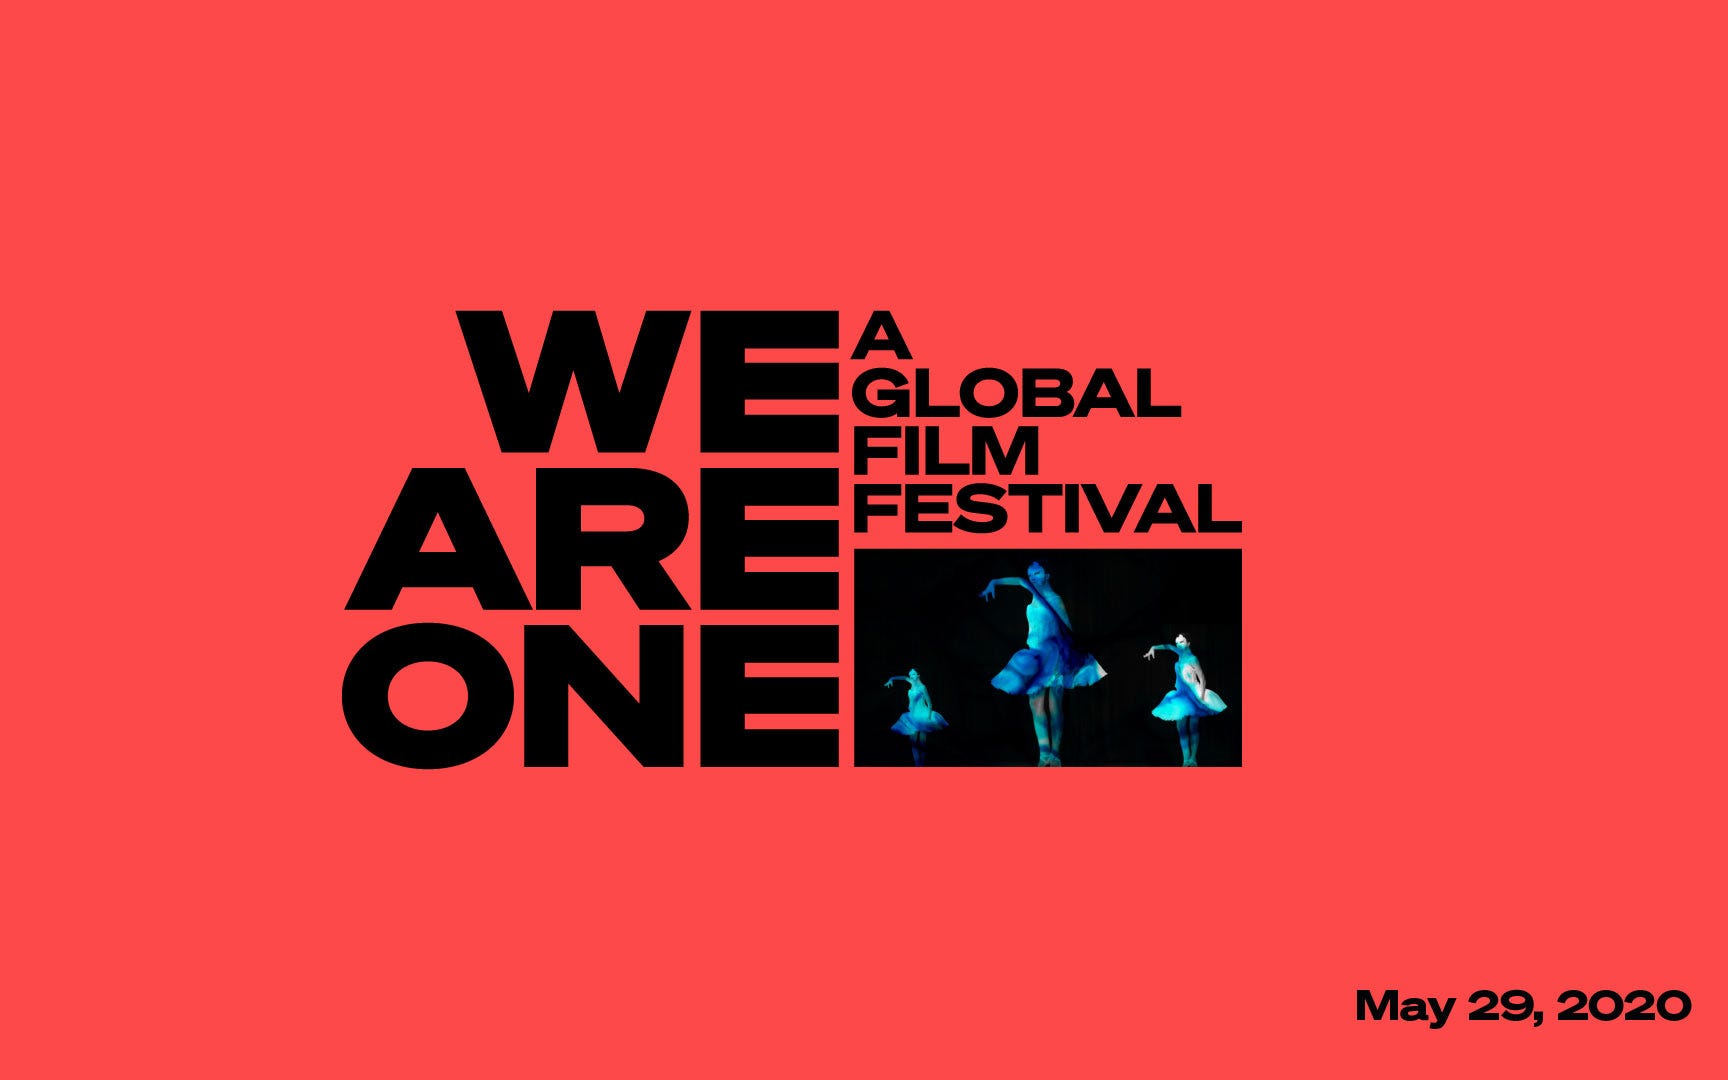 YouTube Announces Free Virtual Film Festival 'We Are One'